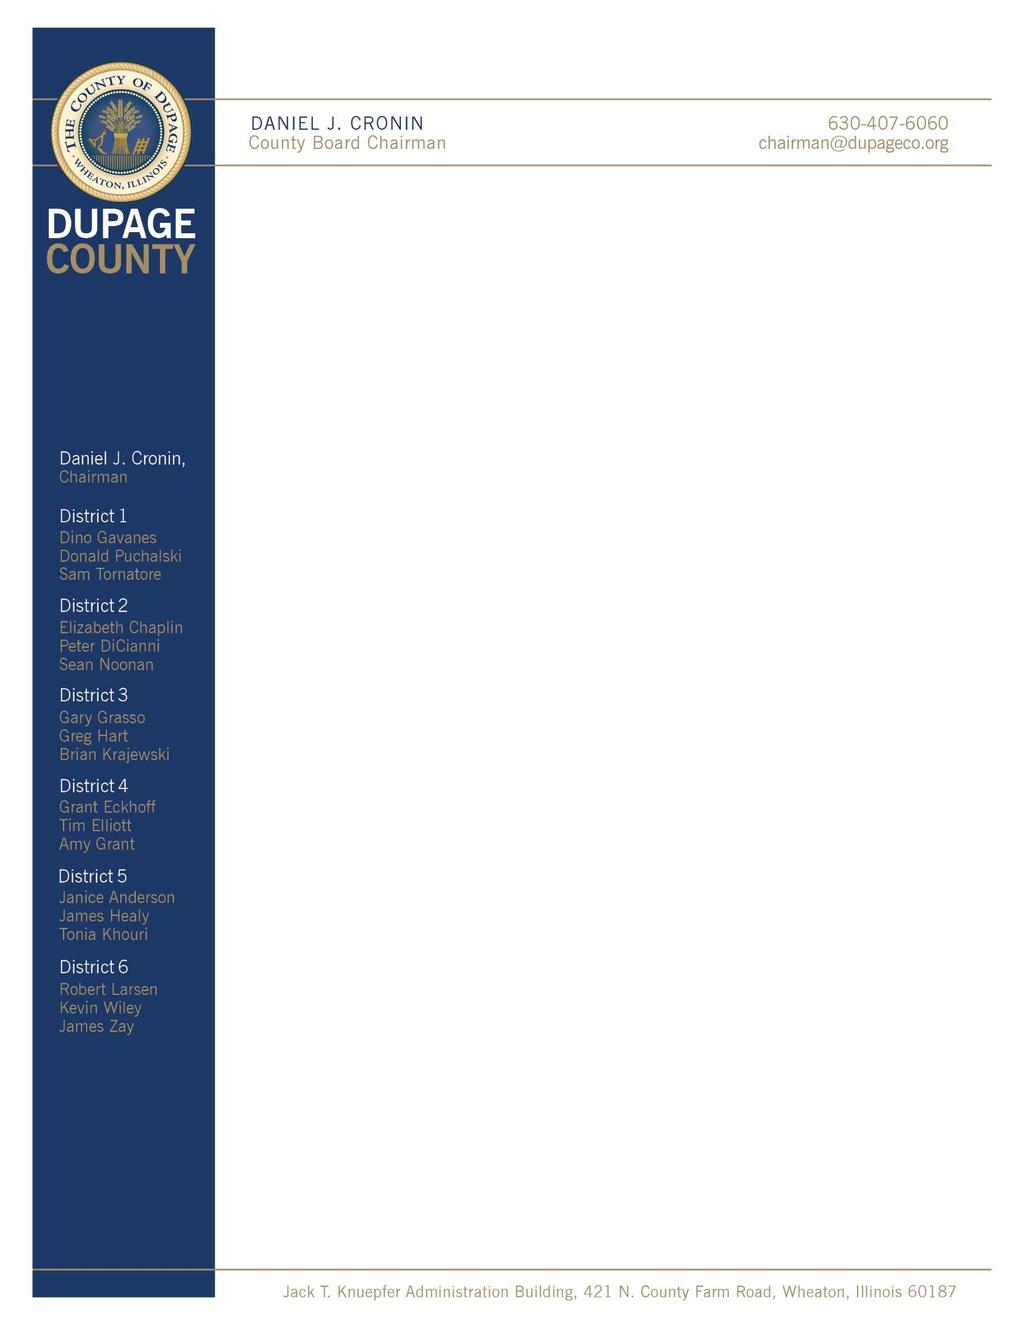 September 25, 2018 Dear DuPage County Taxpayers and County Board Members: I hereby present my recommended FY2019 budget to the DuPage County Board Finance Committee.